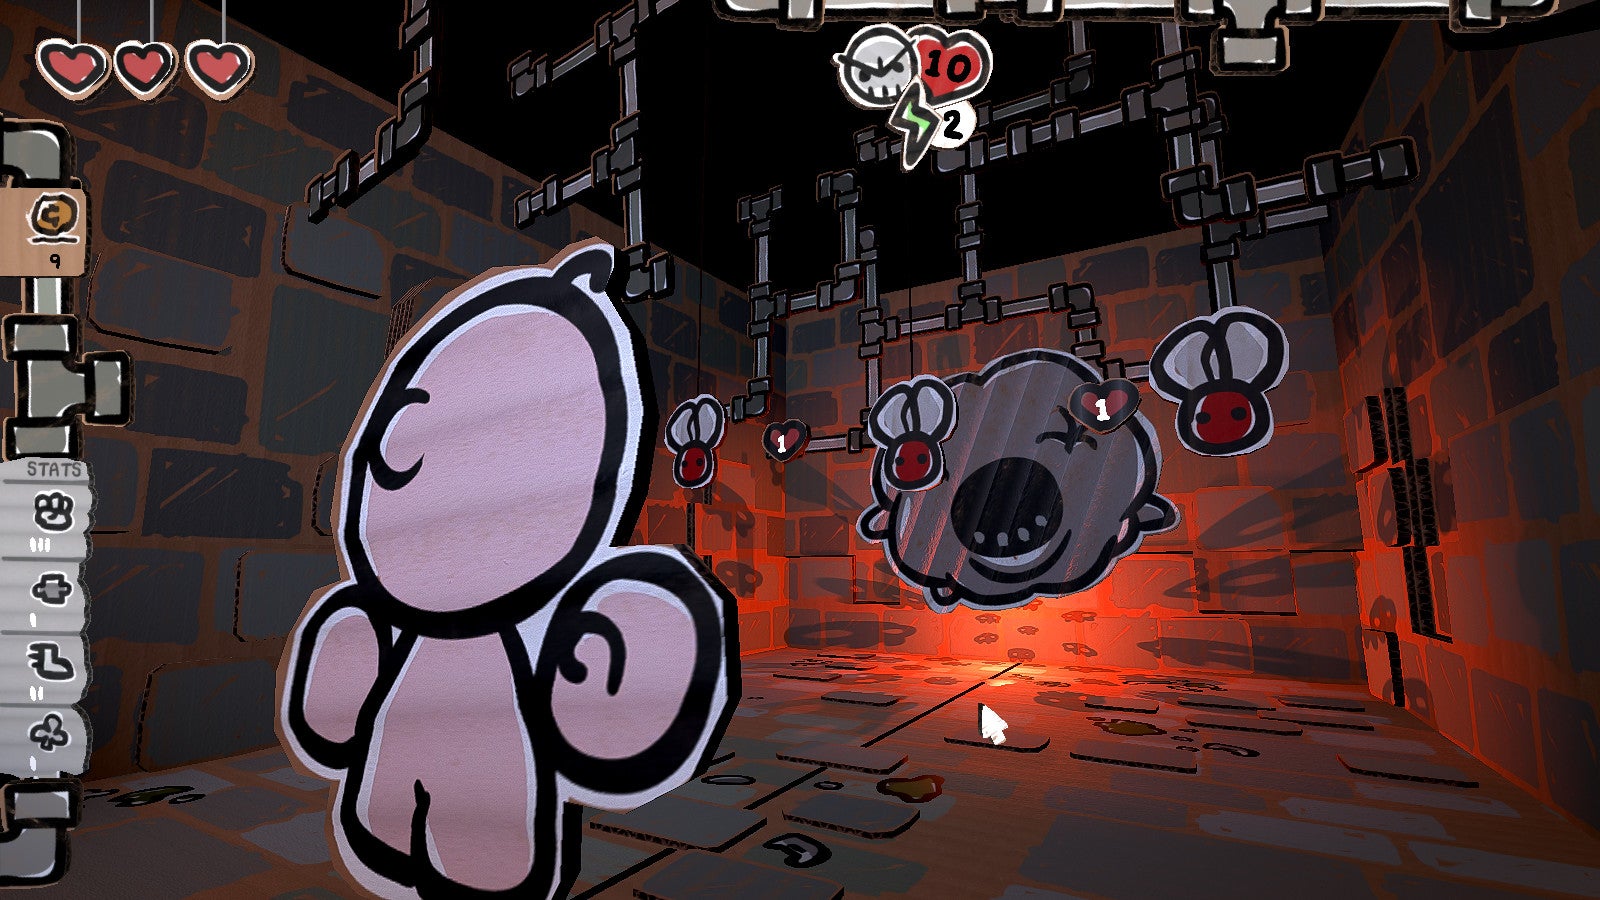 Bum-bo can be seen facing enemies during one of the levels in The Legend of Bum-bo.